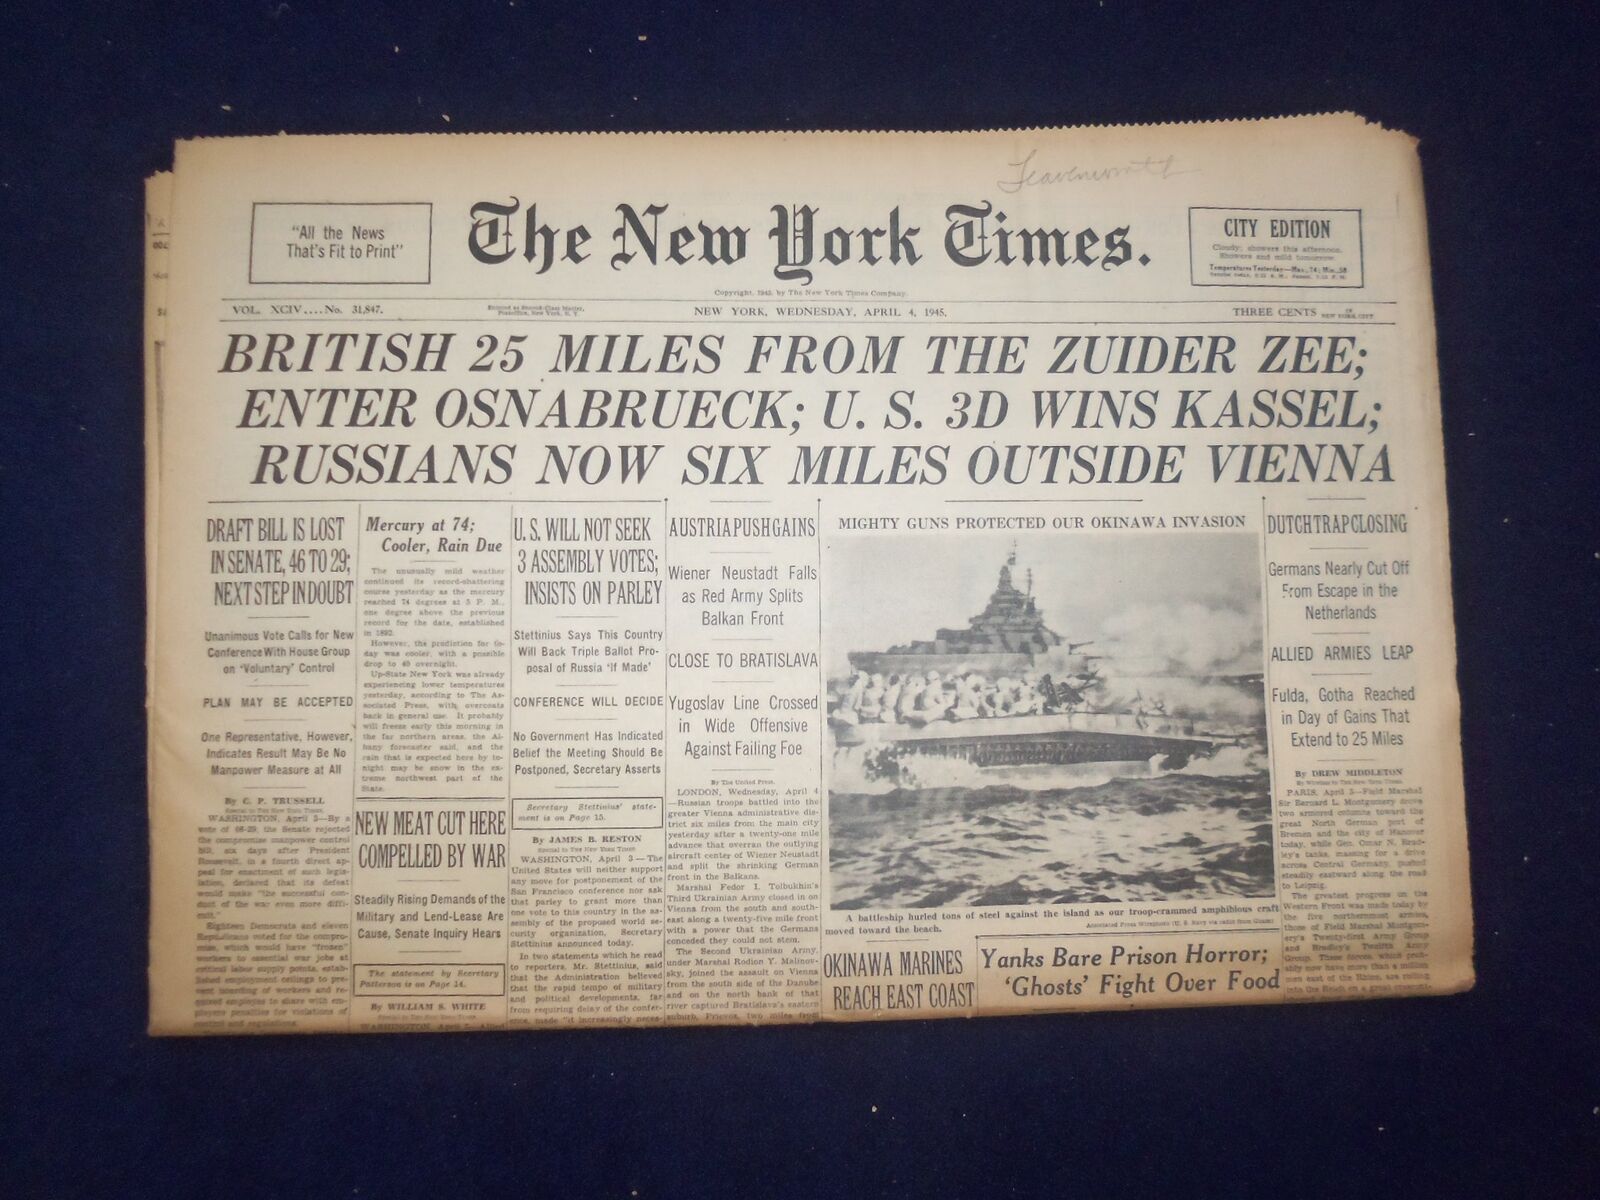 1945 APRIL 4 NEW YORK TIMES - BRITISH 25 MILES FROM THE ZUIDER ZEE - NP 6685